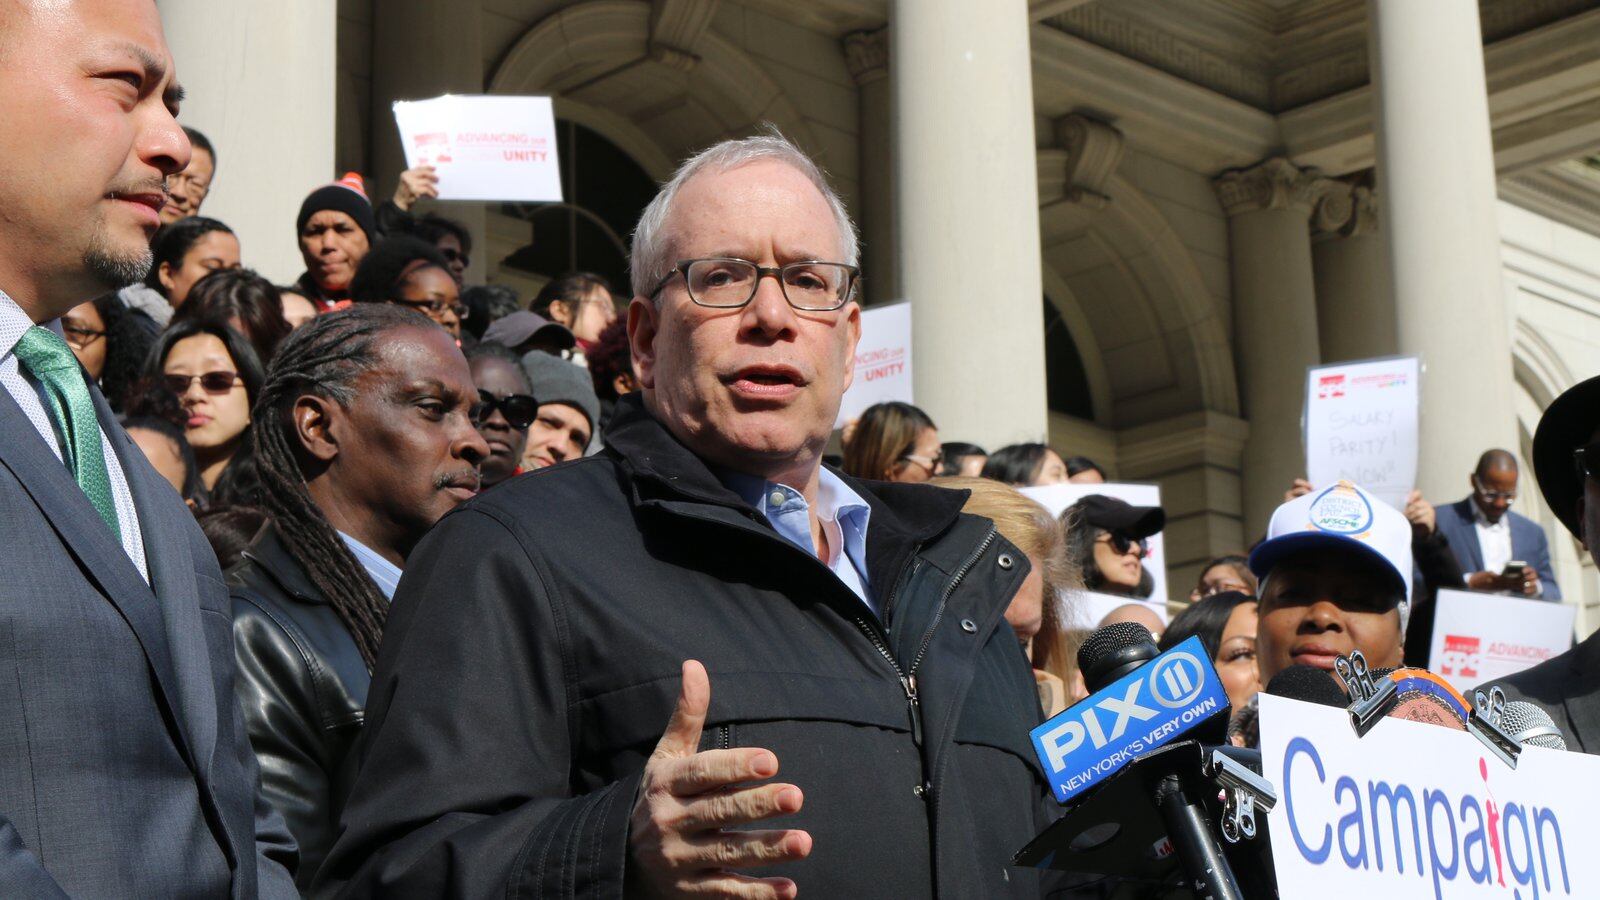 Comptroller Scott Stringer speaks at a rally at City Hall to demand that pre-K teachers in community organizations are paid equally to education department teachers on March 20, 2019.